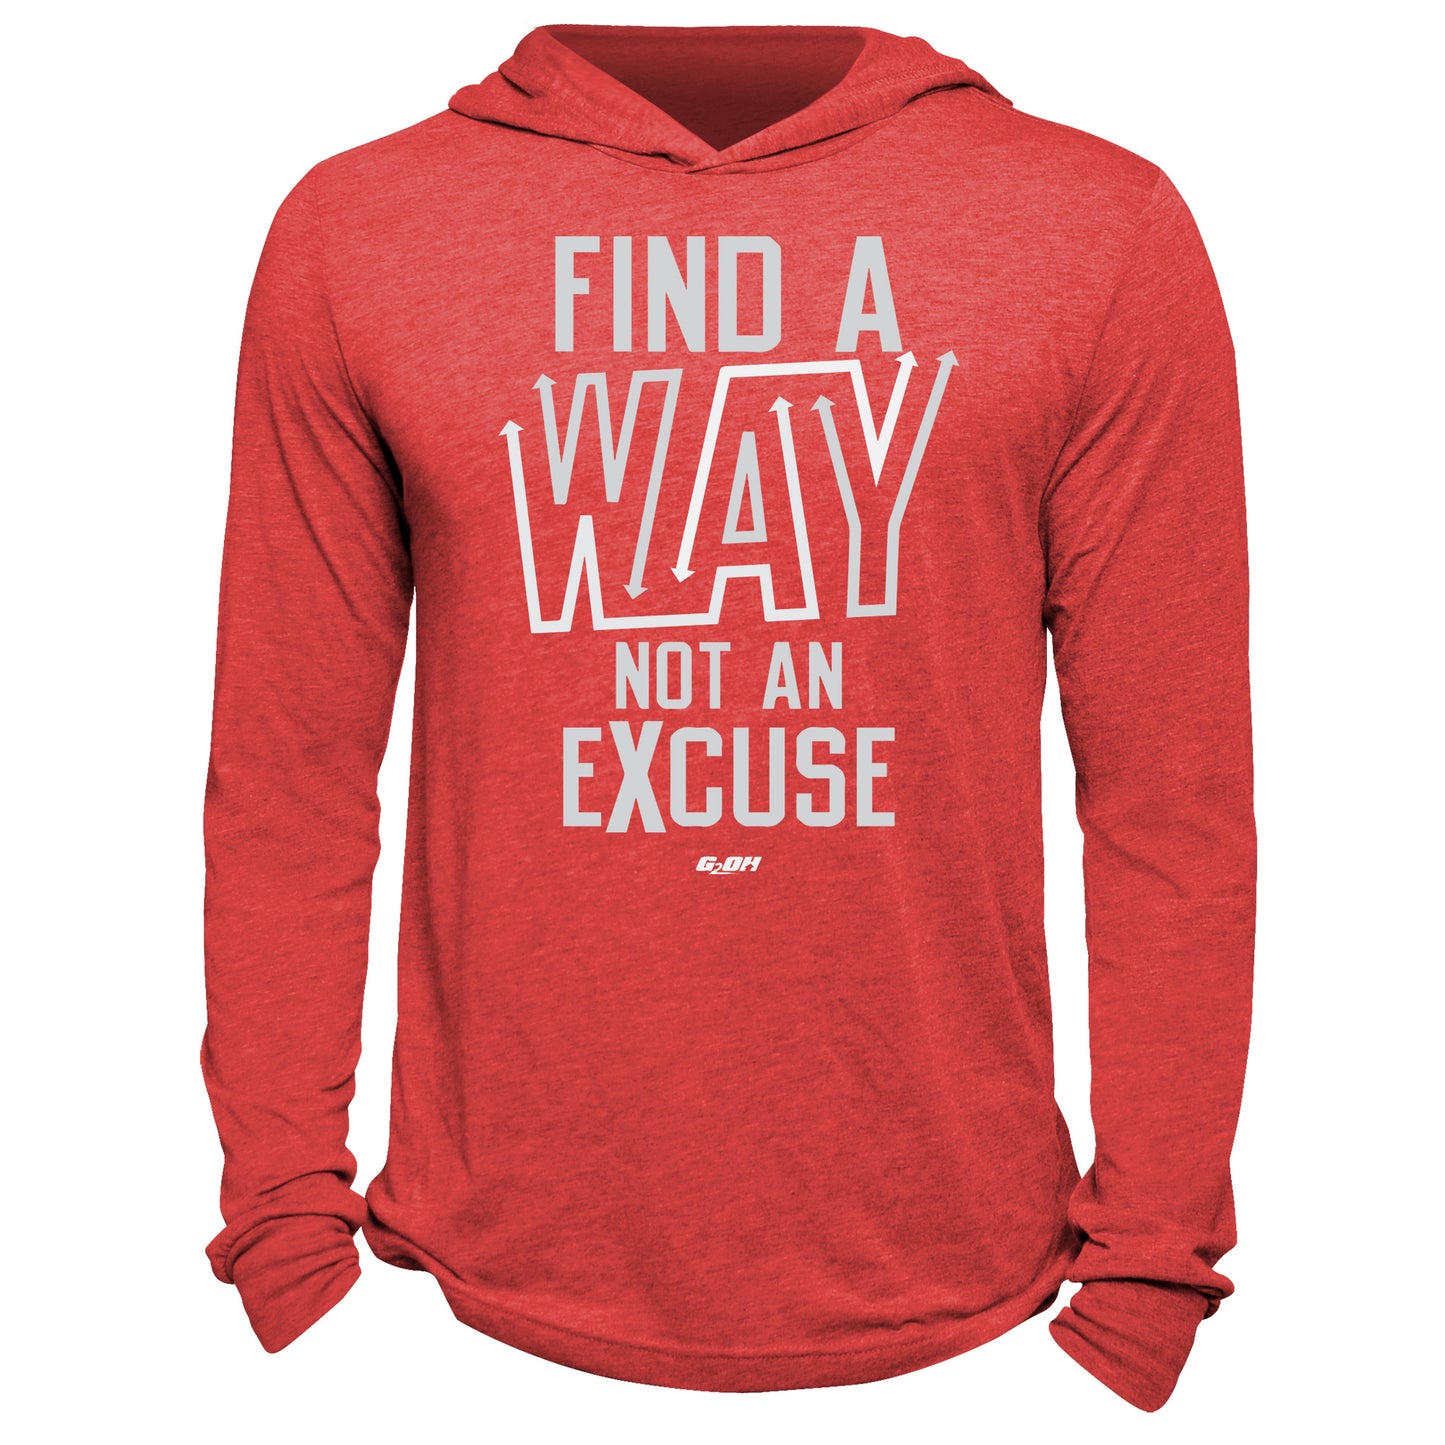 Find A Way, Not An Excuse Hoodie